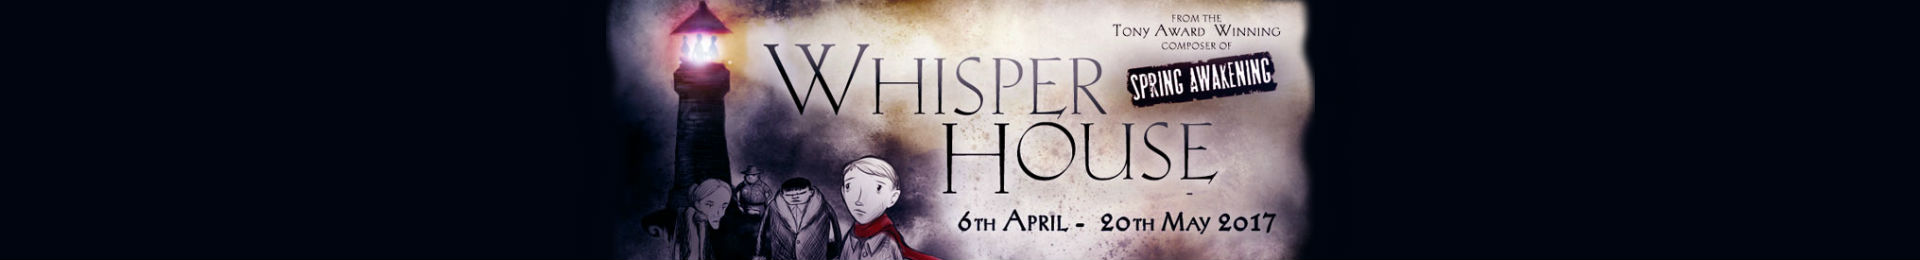 Whisper House tickets